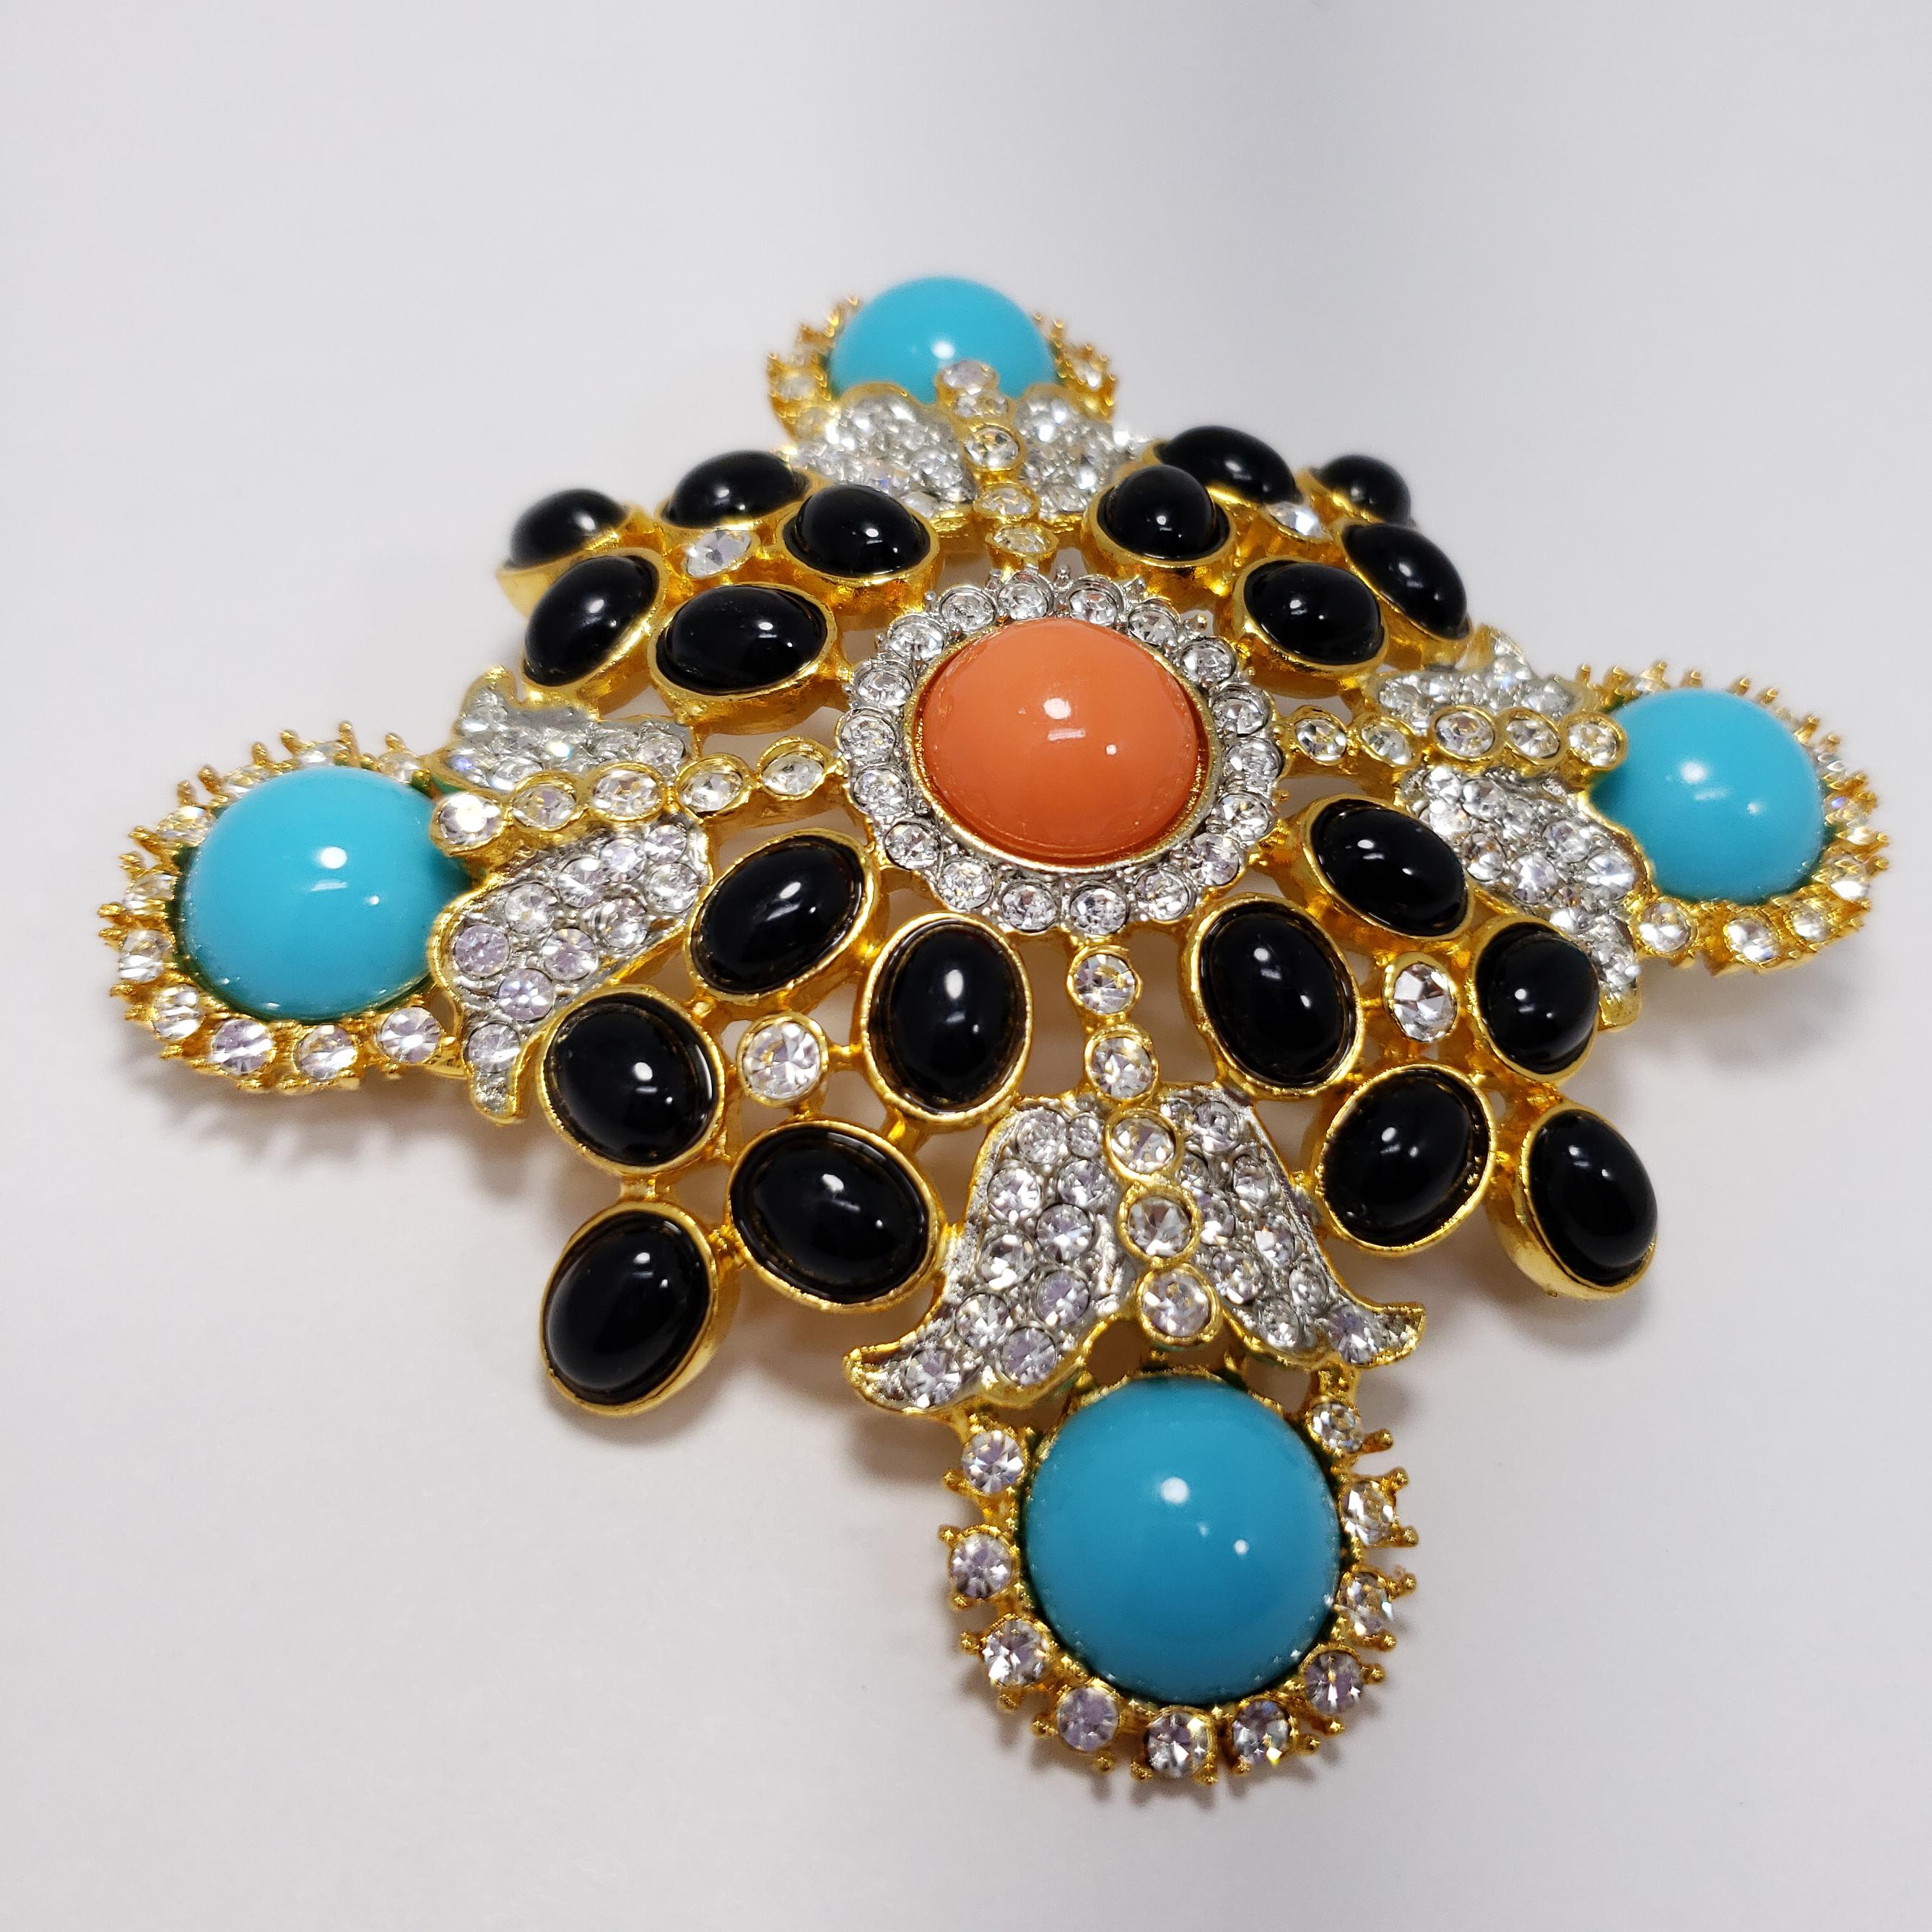 Pavé crystals and black, coral, & turquoise cabochons decorate this regal looking golden pin brooch. This beautiful piece can also be worn as a pendant.

Hallmarks: Kenneth Lane, Made in USA